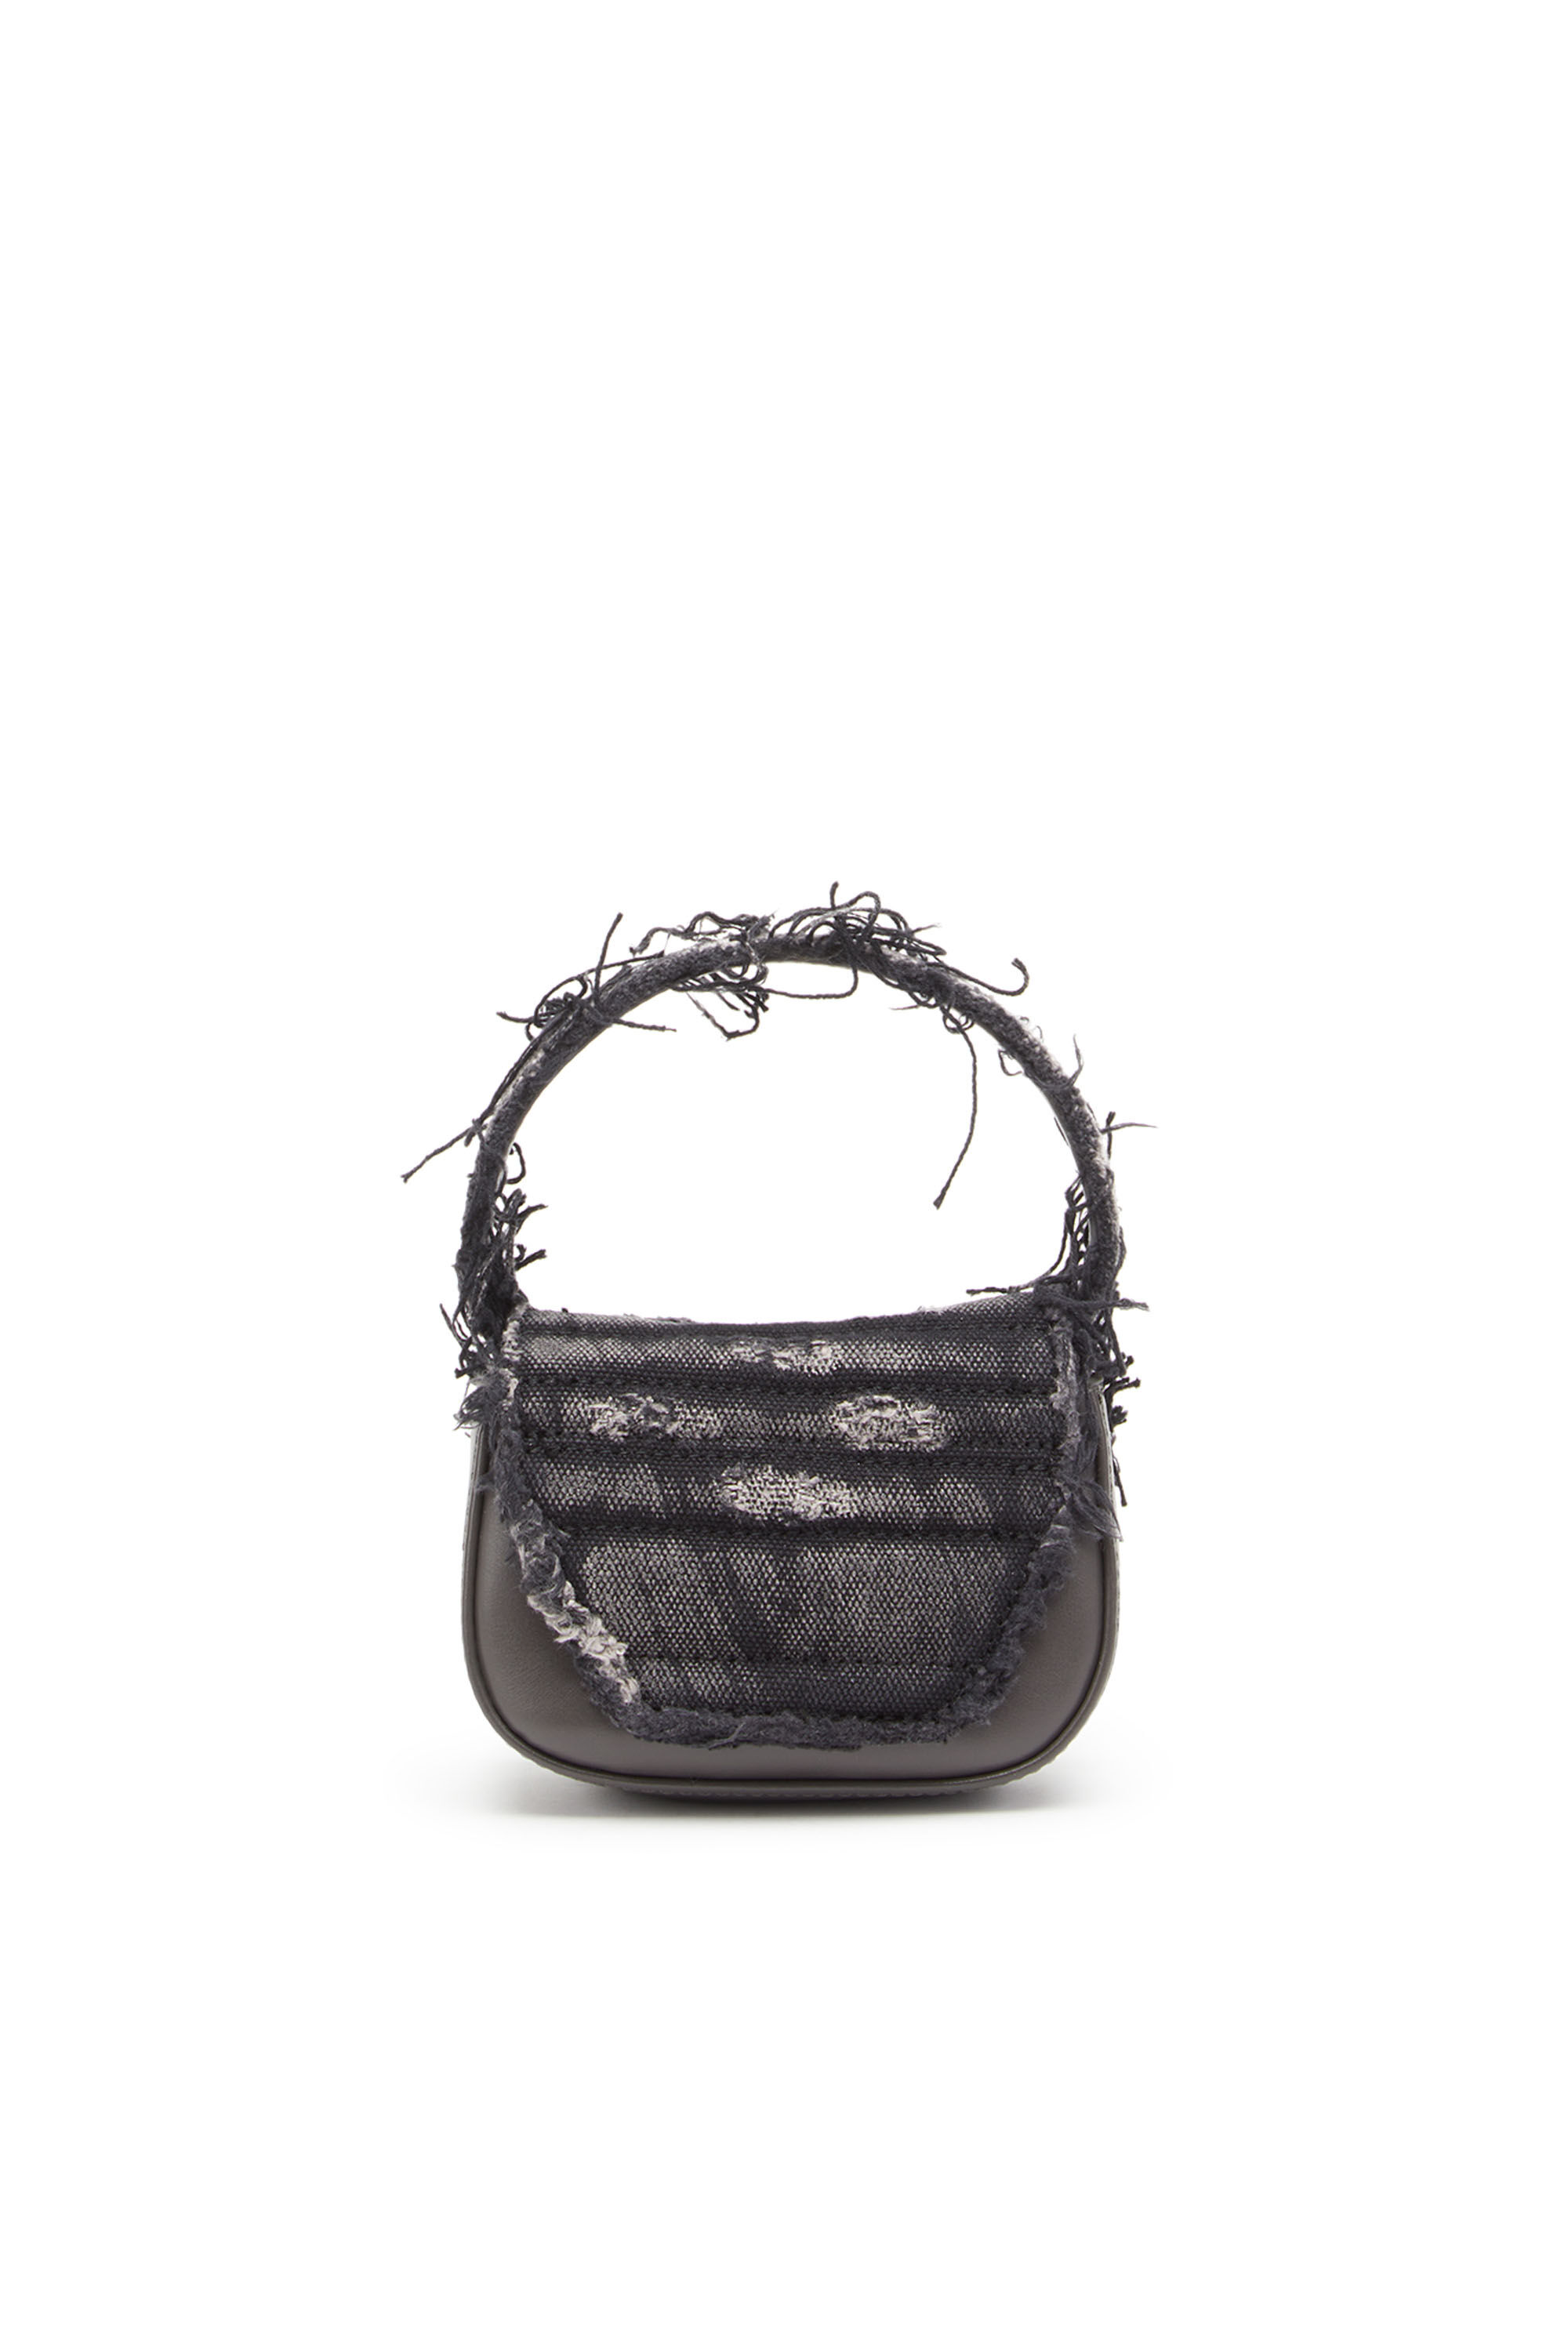 Diesel - 1DR XS, Woman 1DR XS - Iconic mini bag in canvas and crystals in Black - Image 3